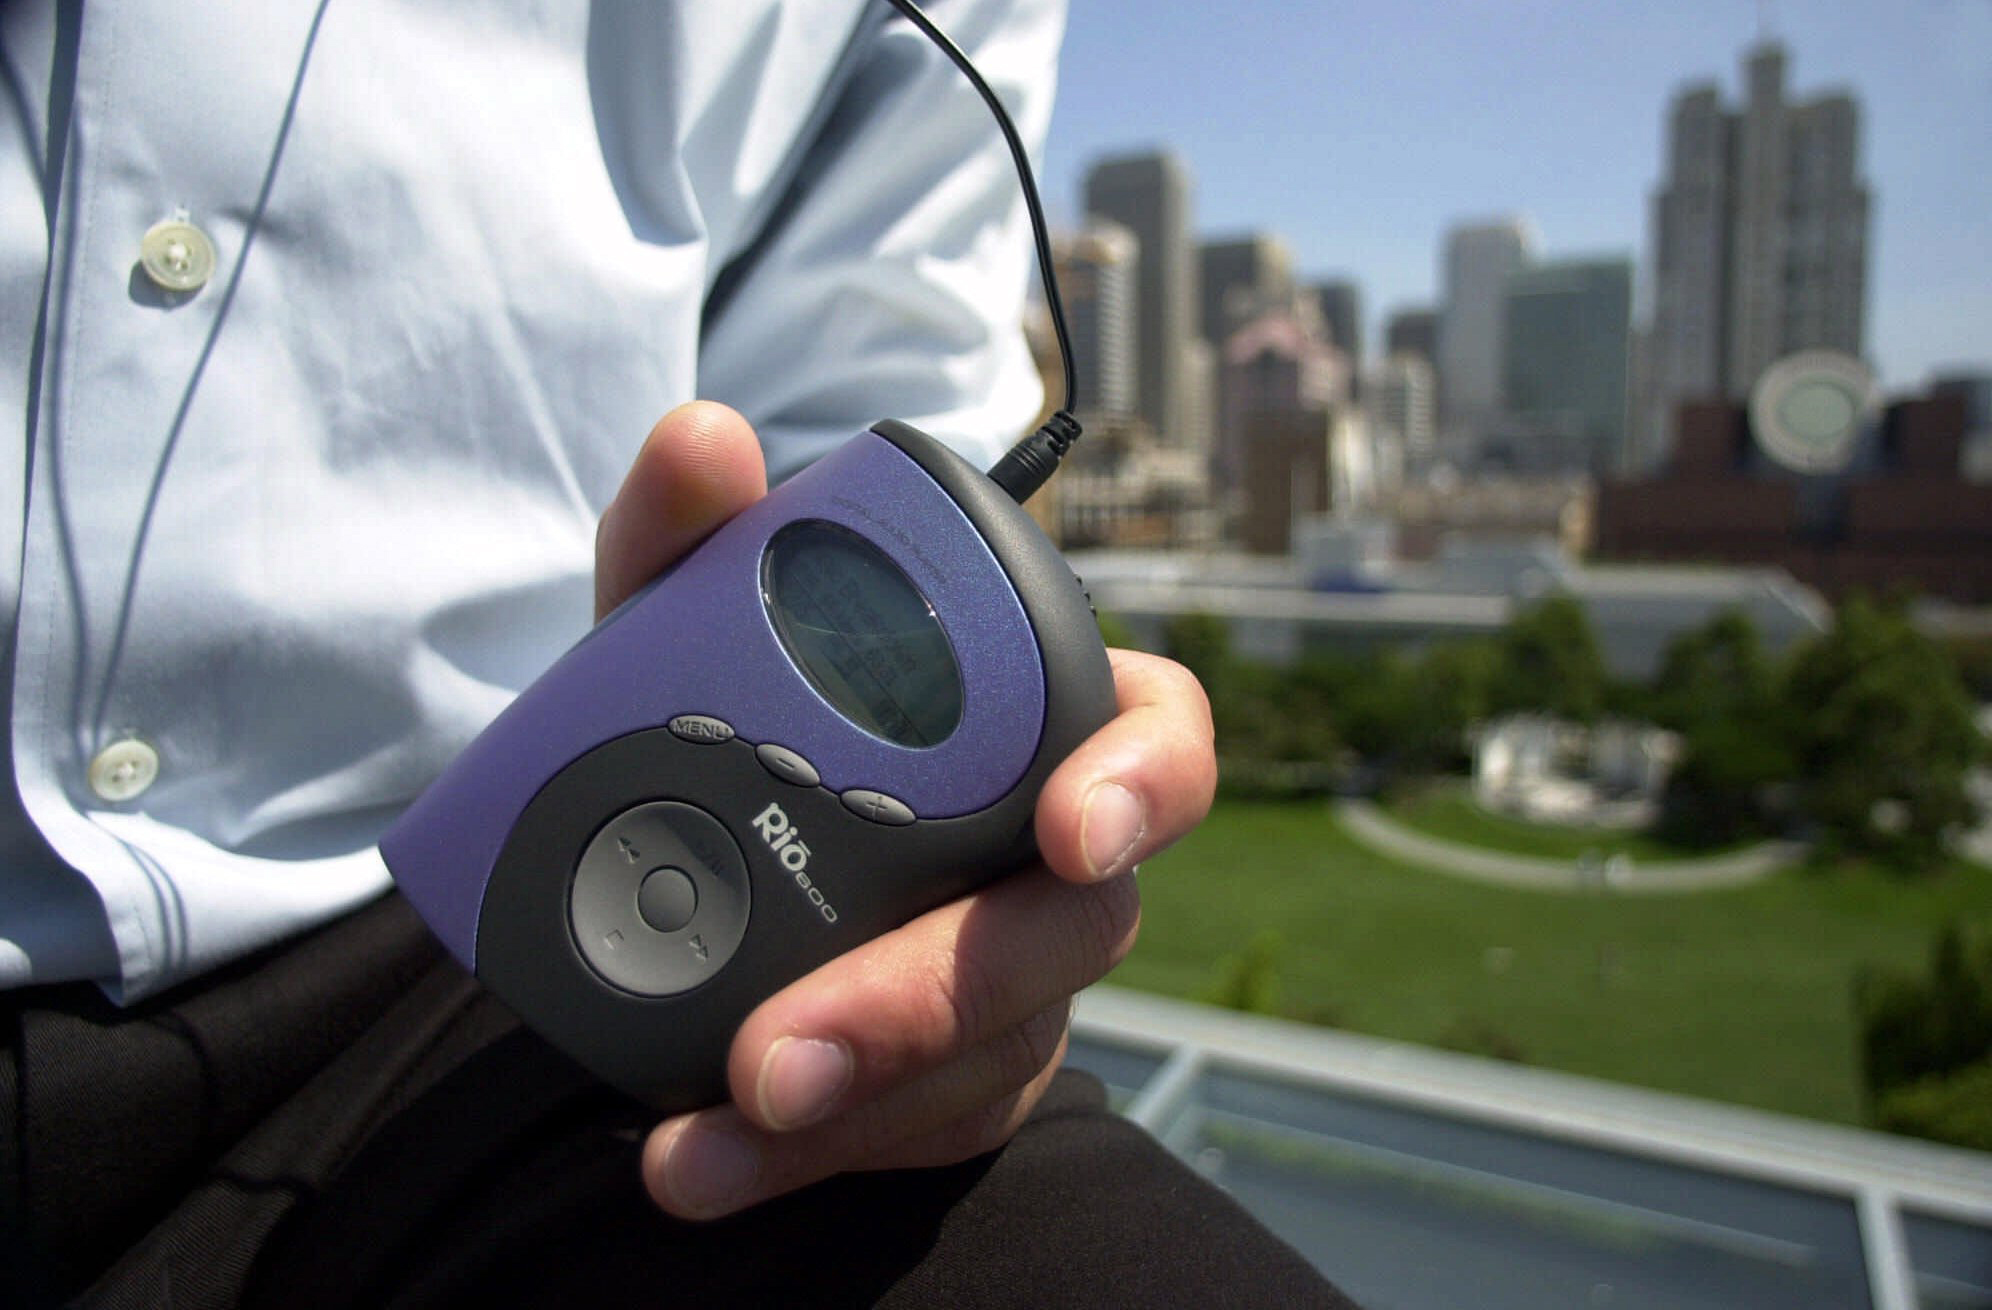 Ernesto Roy holds a Diamond Rio portable MP3 player in San Francisco on Thursday, July 27, 2000. The tiny device can store and play dozens of megabytes of downloaded MP3 music files. A federal court yesterday ordered an injuction against Napster, a major resource for MP3s on the internet.